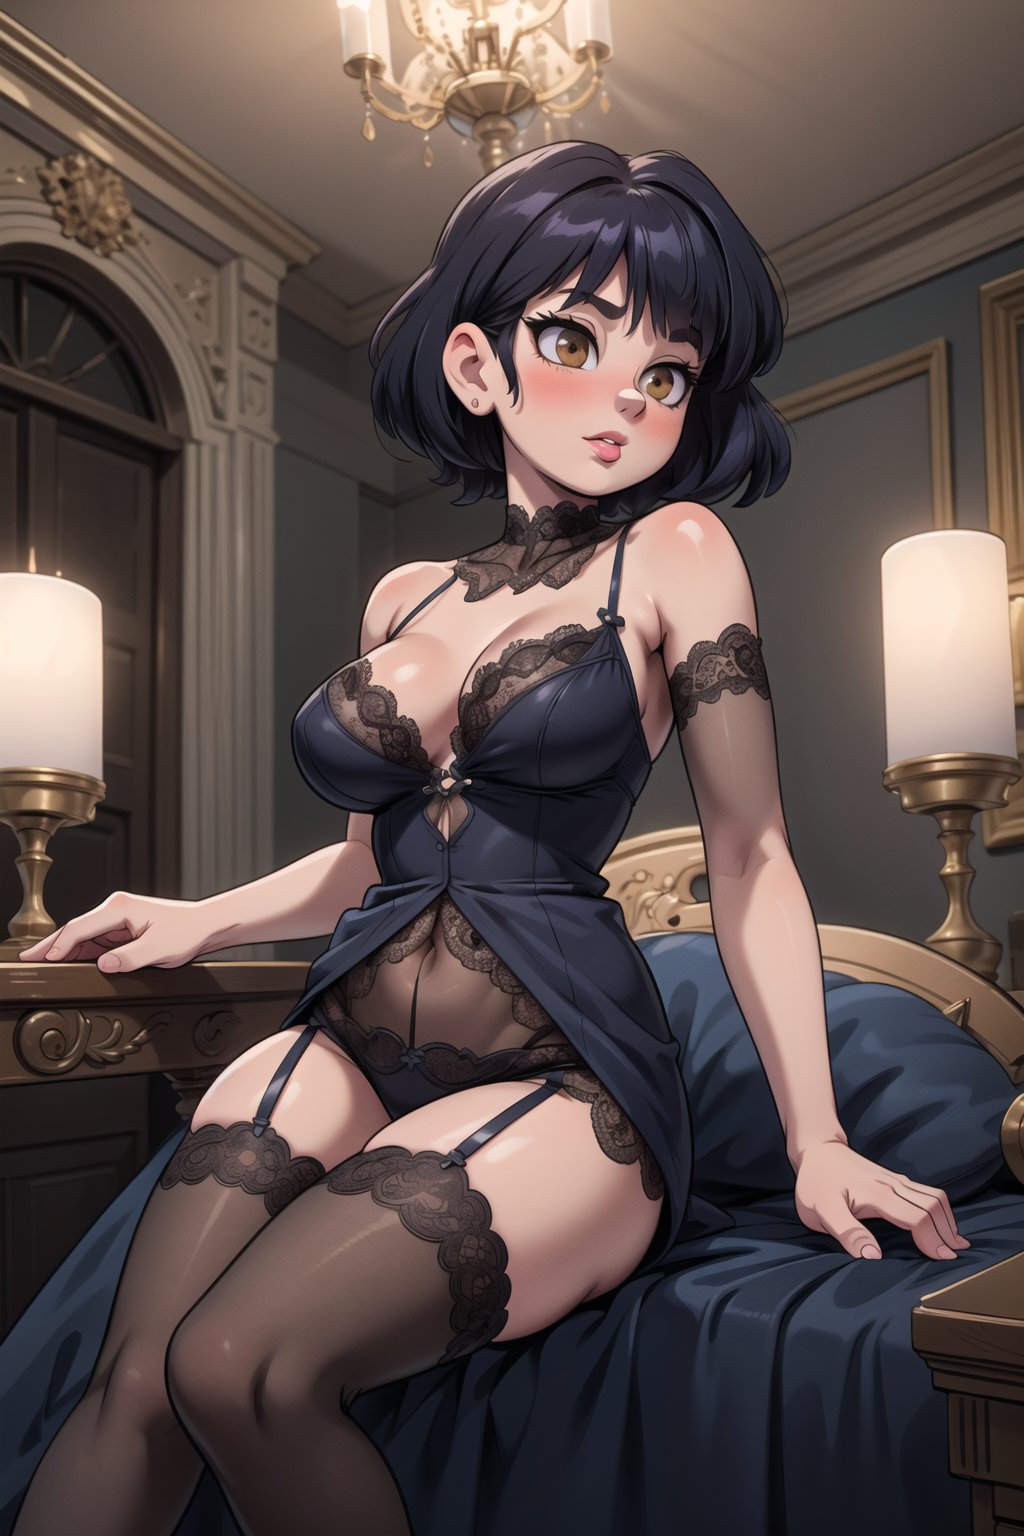 High resolution, extremely detailed, atmospheric scene, masterpiece, best quality, 64k, high quality, (HDR), HQ, 1 girl, raven-haired, brown eyes, lace-trimmed chemise, silk stockings, antique furnishings, lavish boudoir setting, candelabras lit, soft music playing, reclining pose Sultry Expression, Lip Gloss, Ultra Detailed,